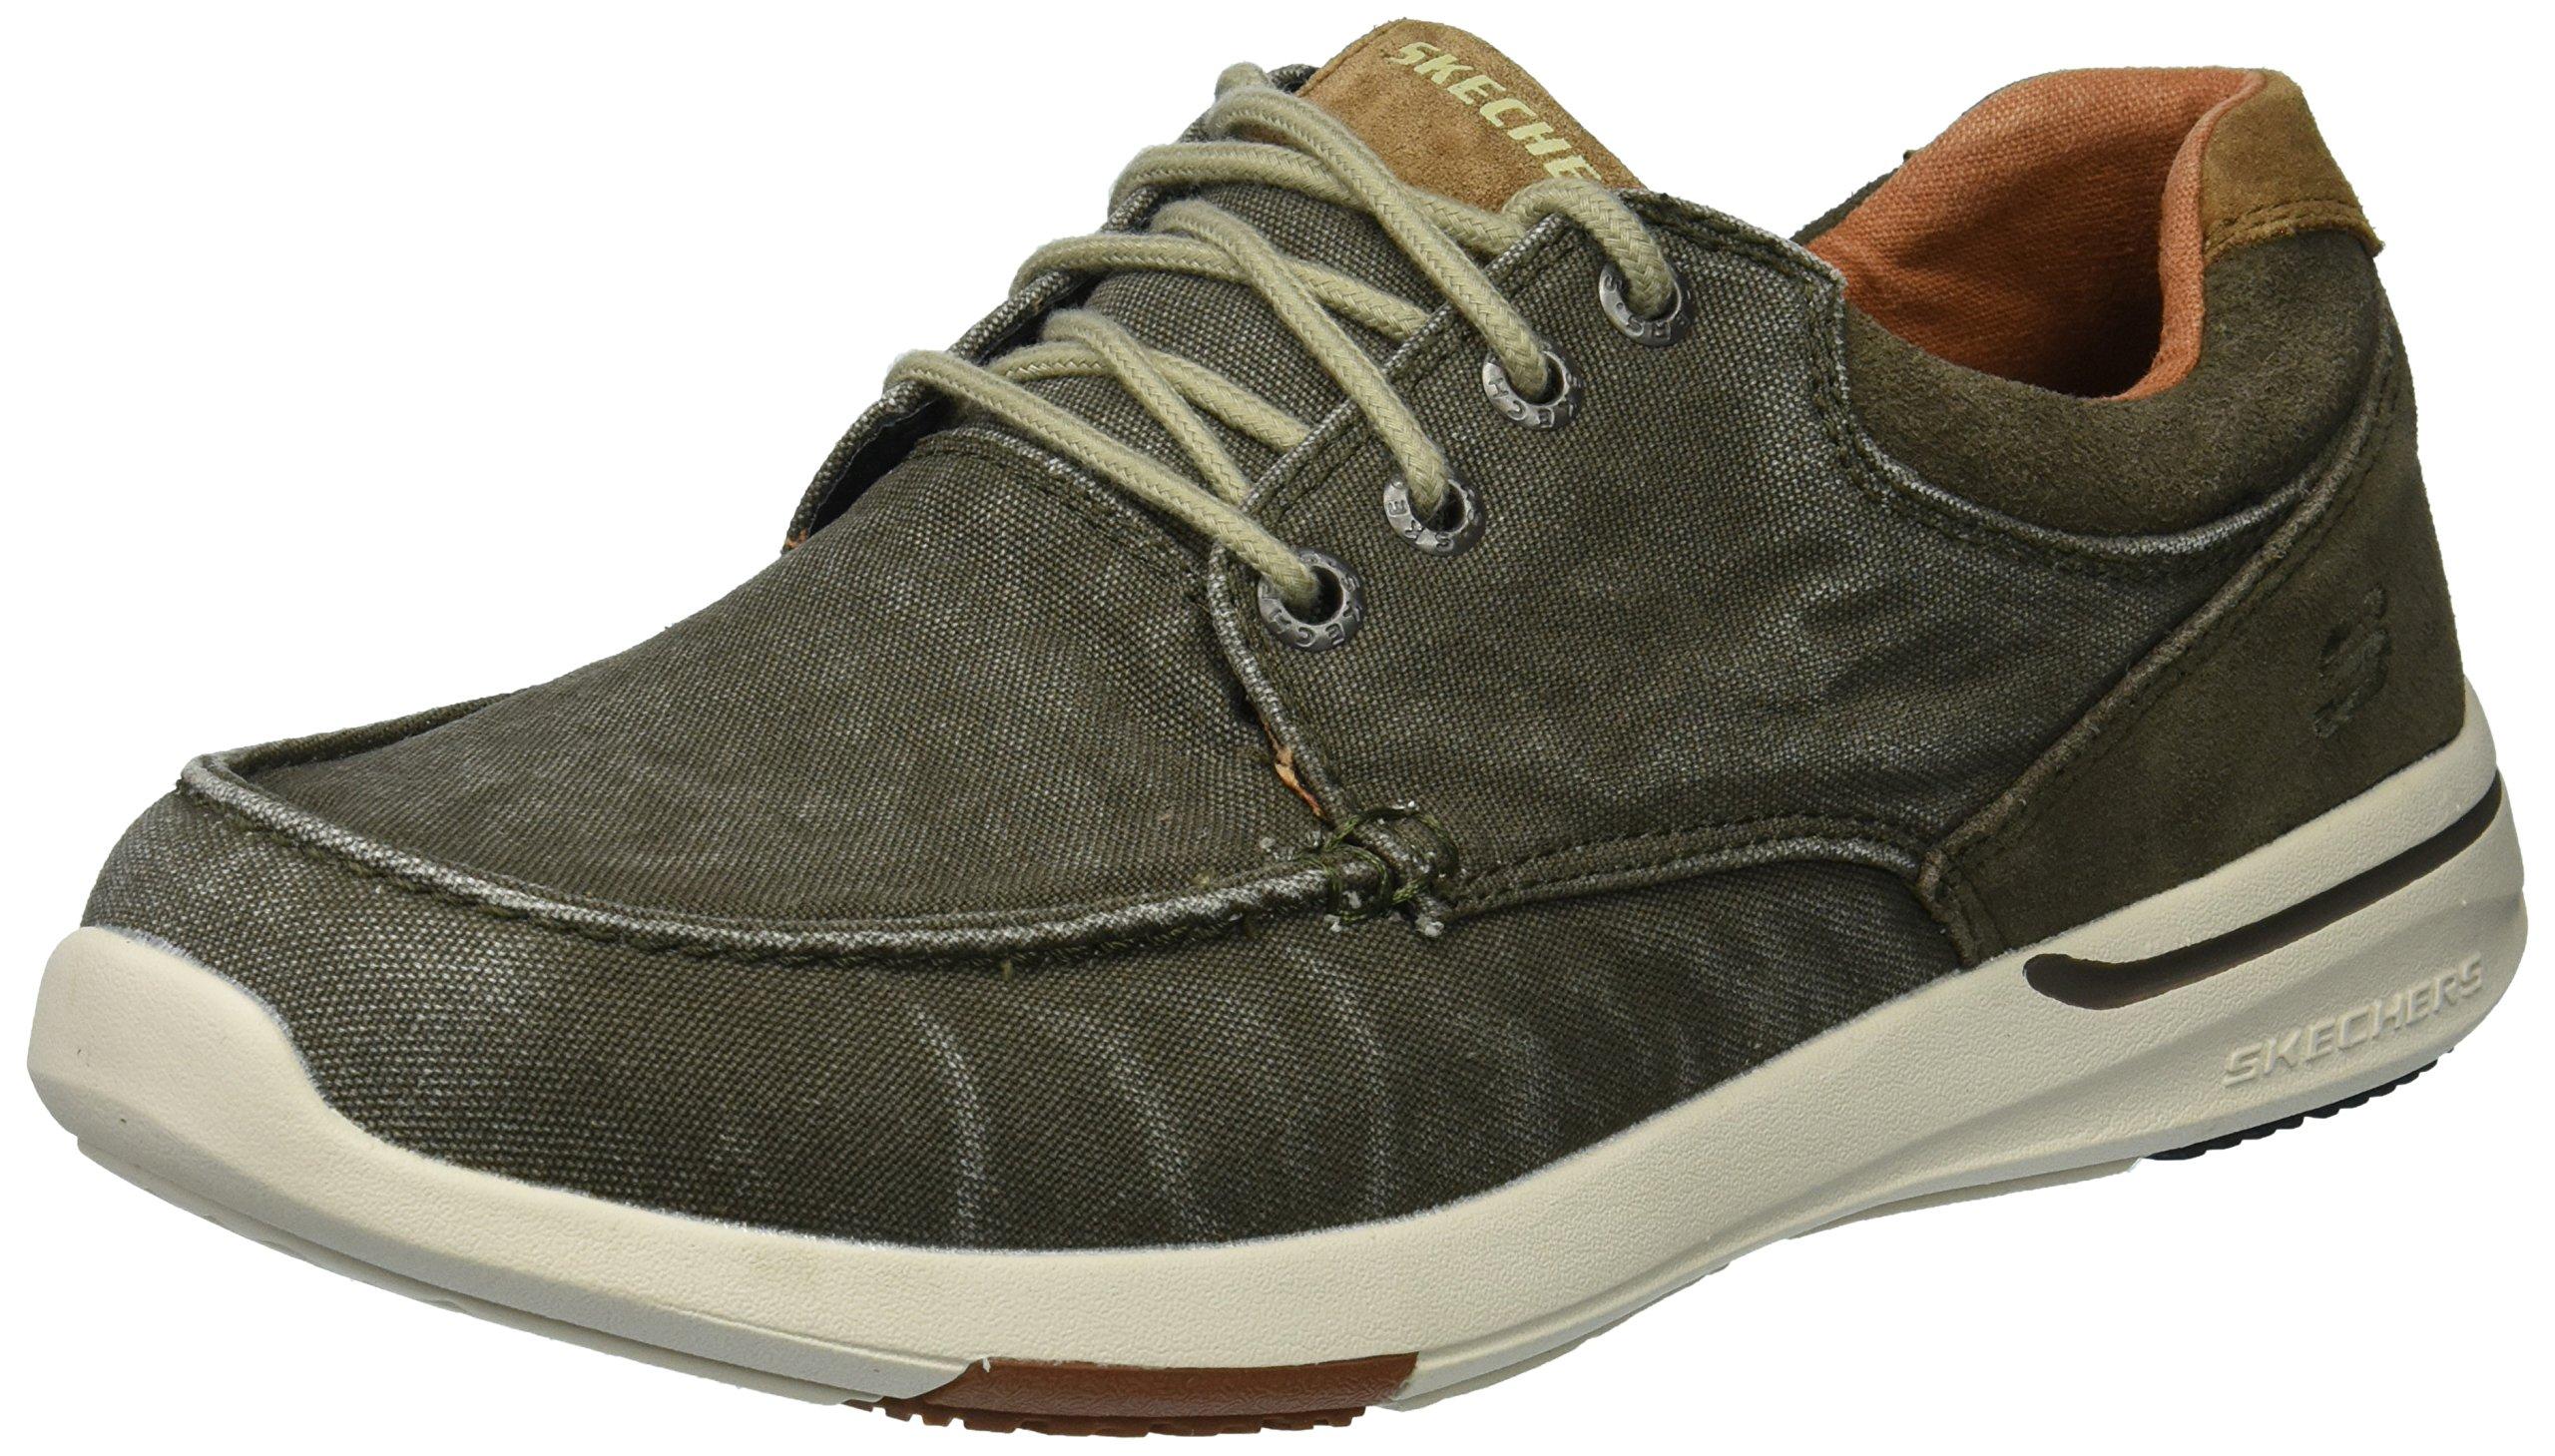 Skechers Canvas 65494 Boat Shoes in Green Olive (Green